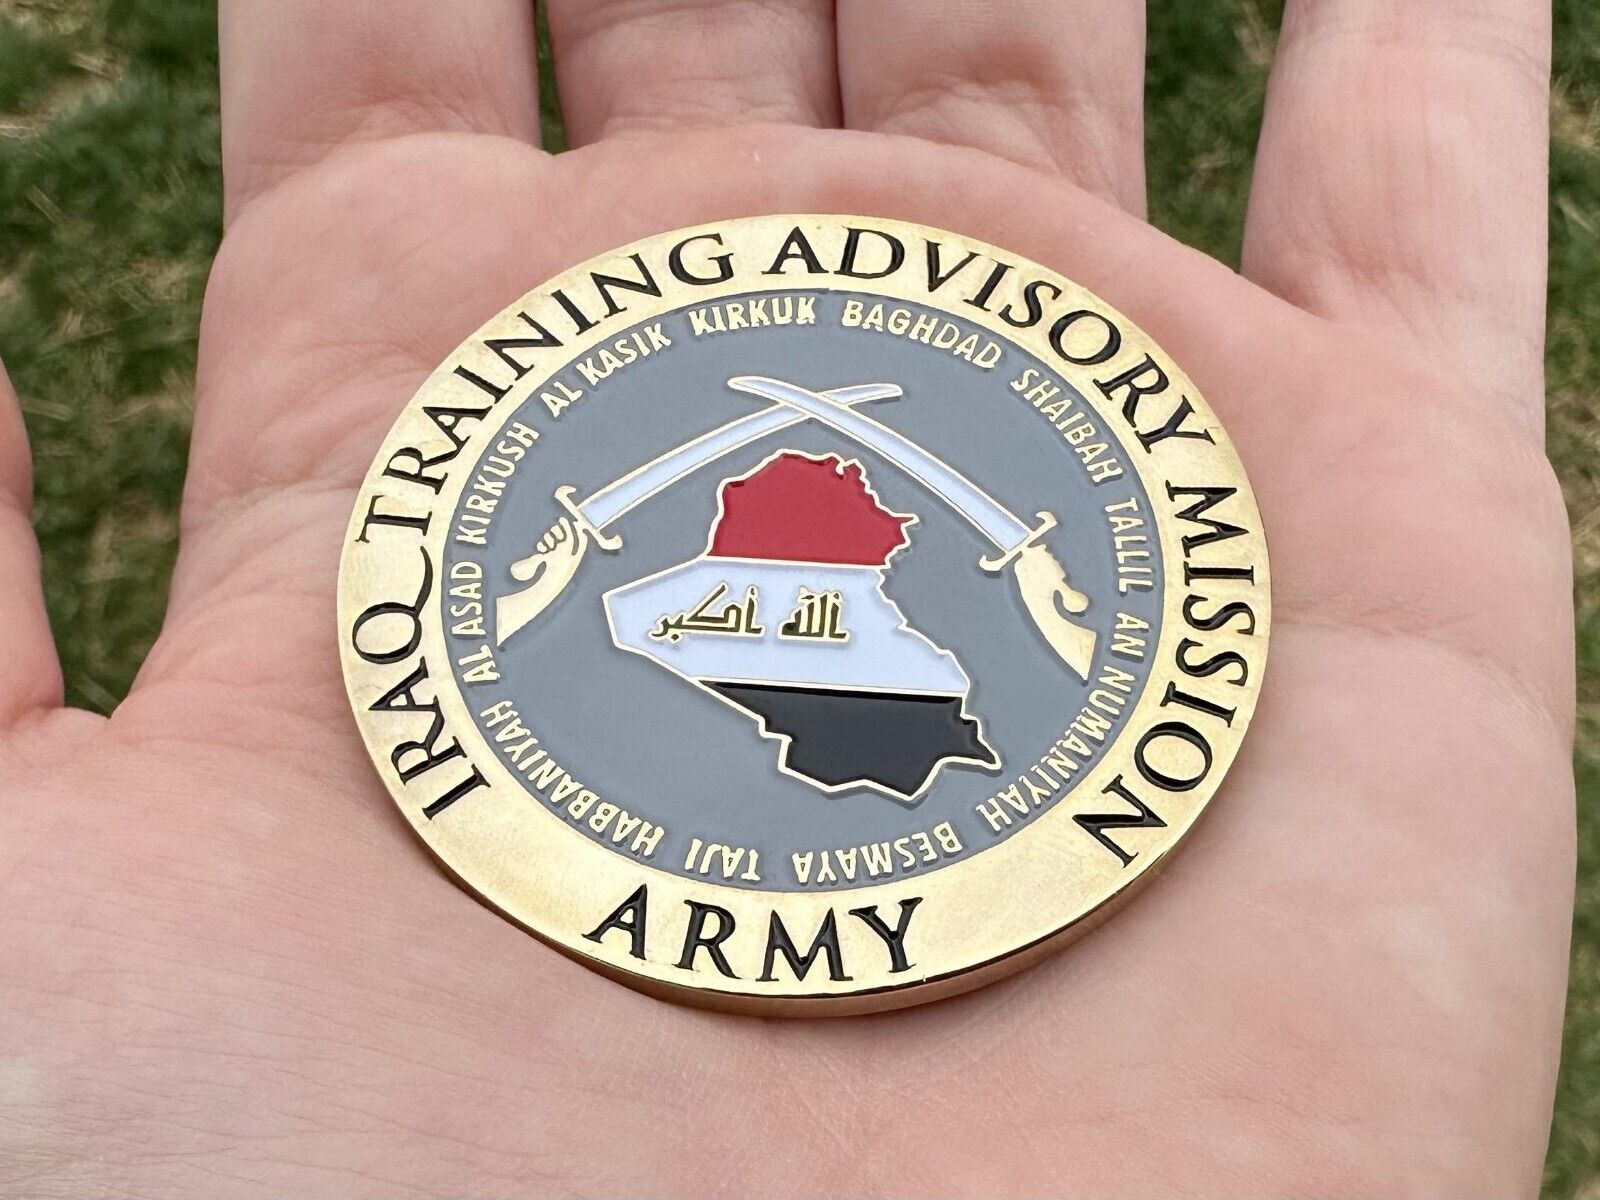 Baghdad Iraq Training Advisory Commission Challenge Coin Private Collection Army